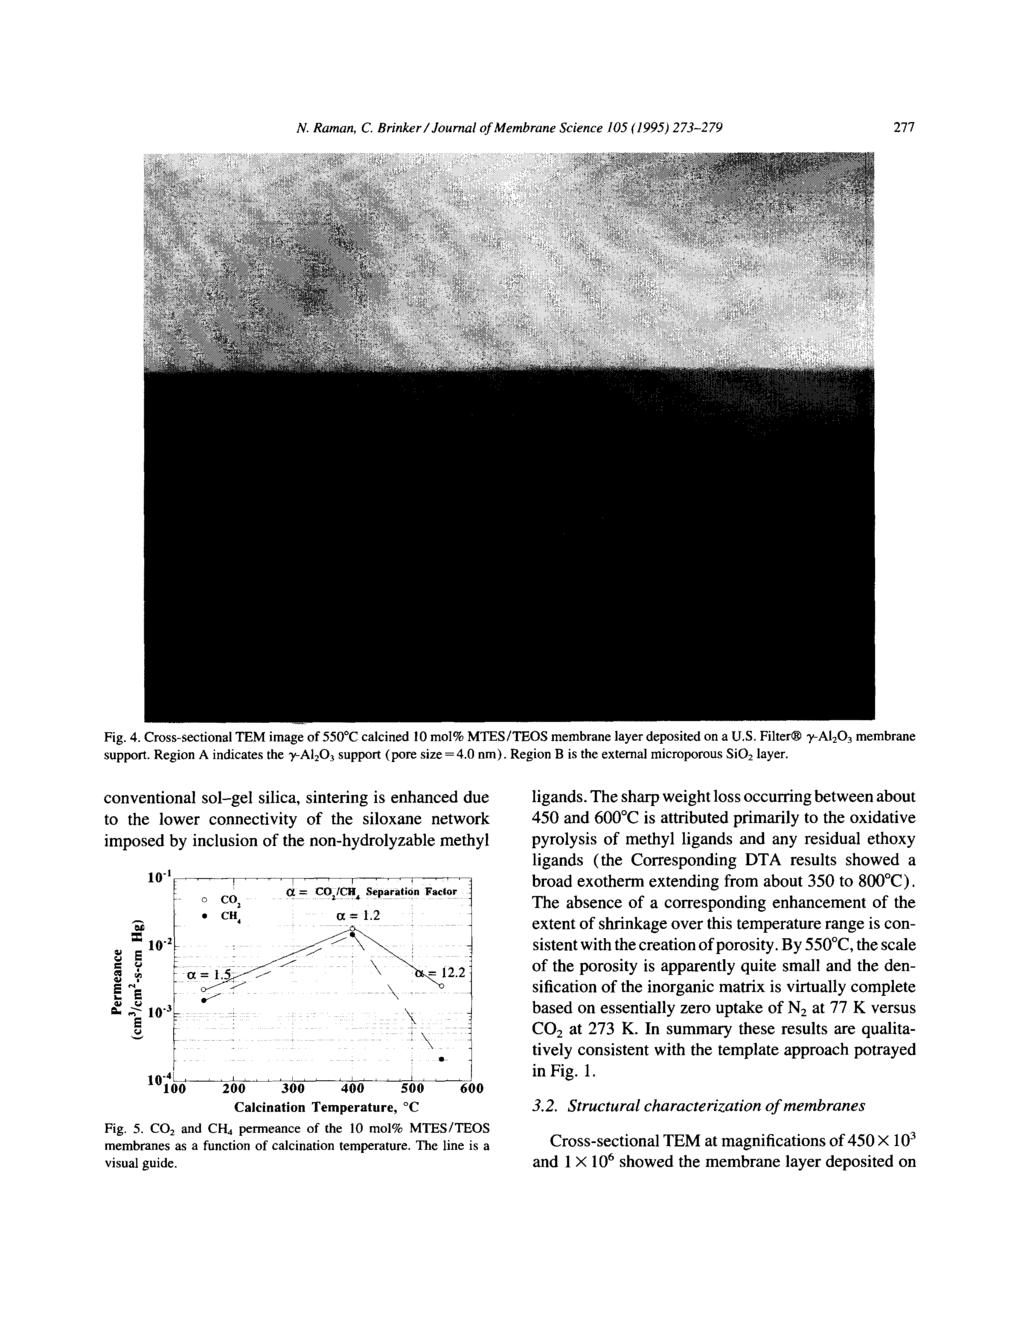 N. Raman, C. Brinker / Journal of Membrane Science 105 (1995) 273-279 277 Fig. 4. Cross-sectional TEM image of 550 C calcined 10 mol% MTES/TEOS membrane layer deposited on a U.S. Filter 3,-A1203 membrane support.